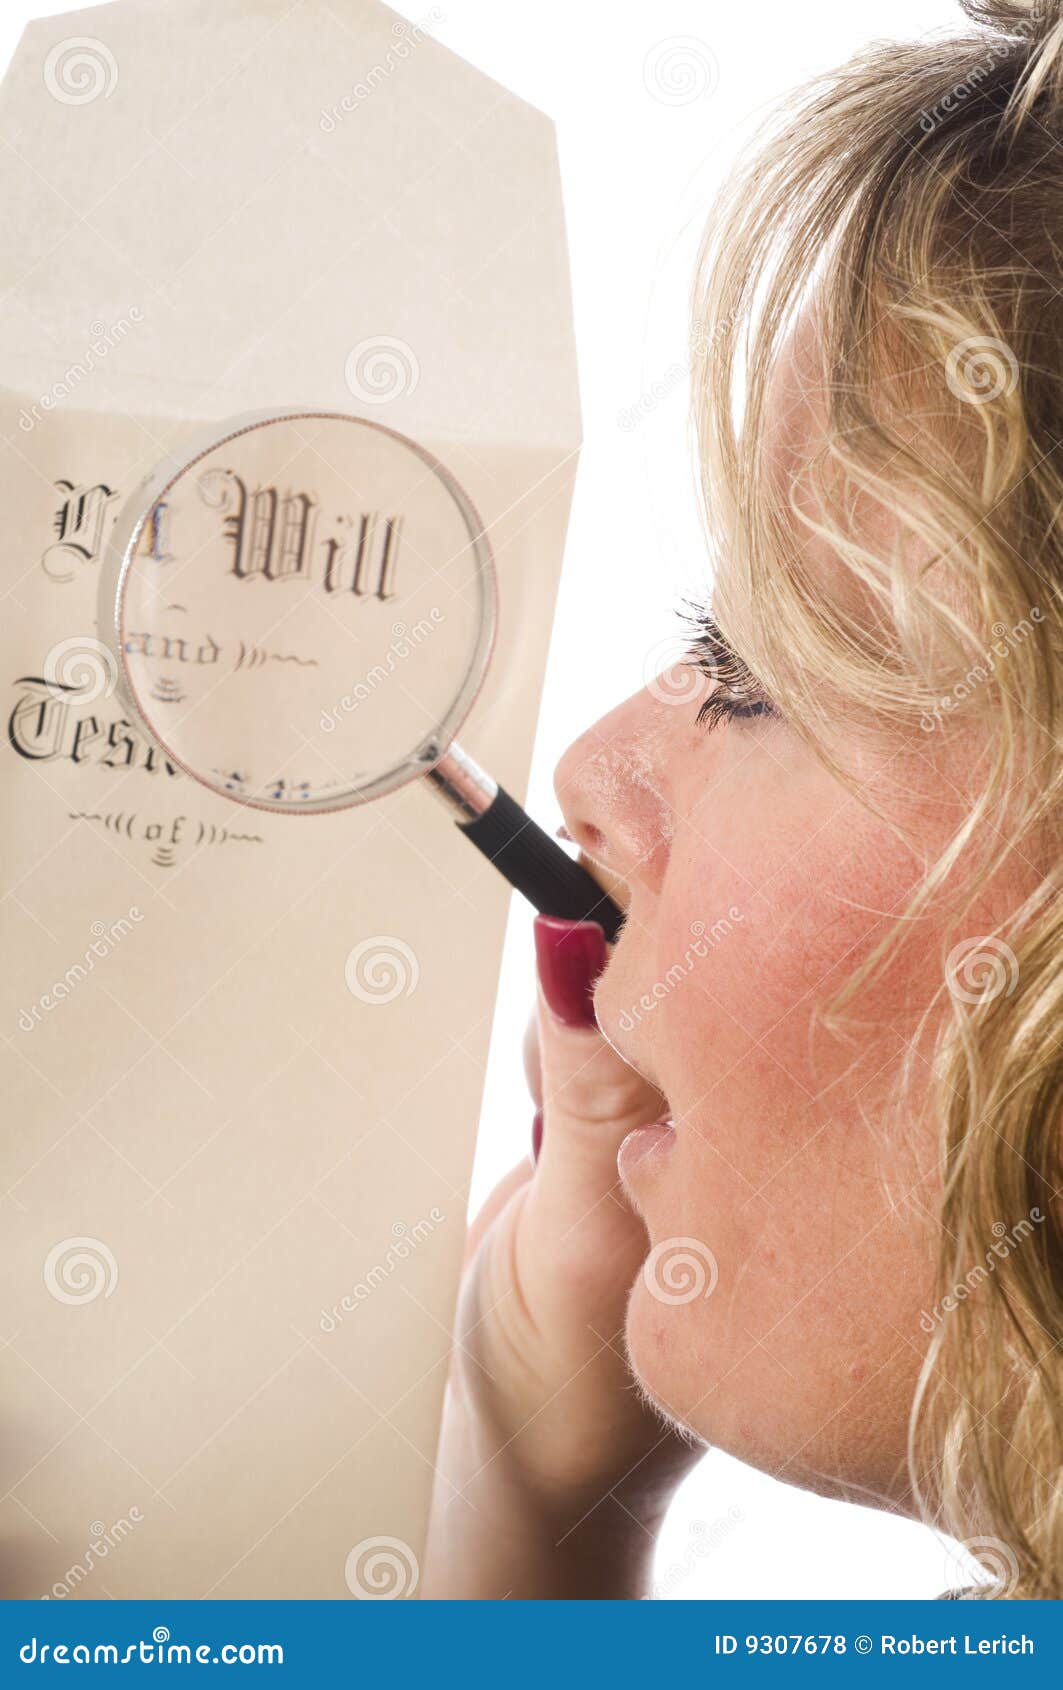 woman inspecting last will and testament